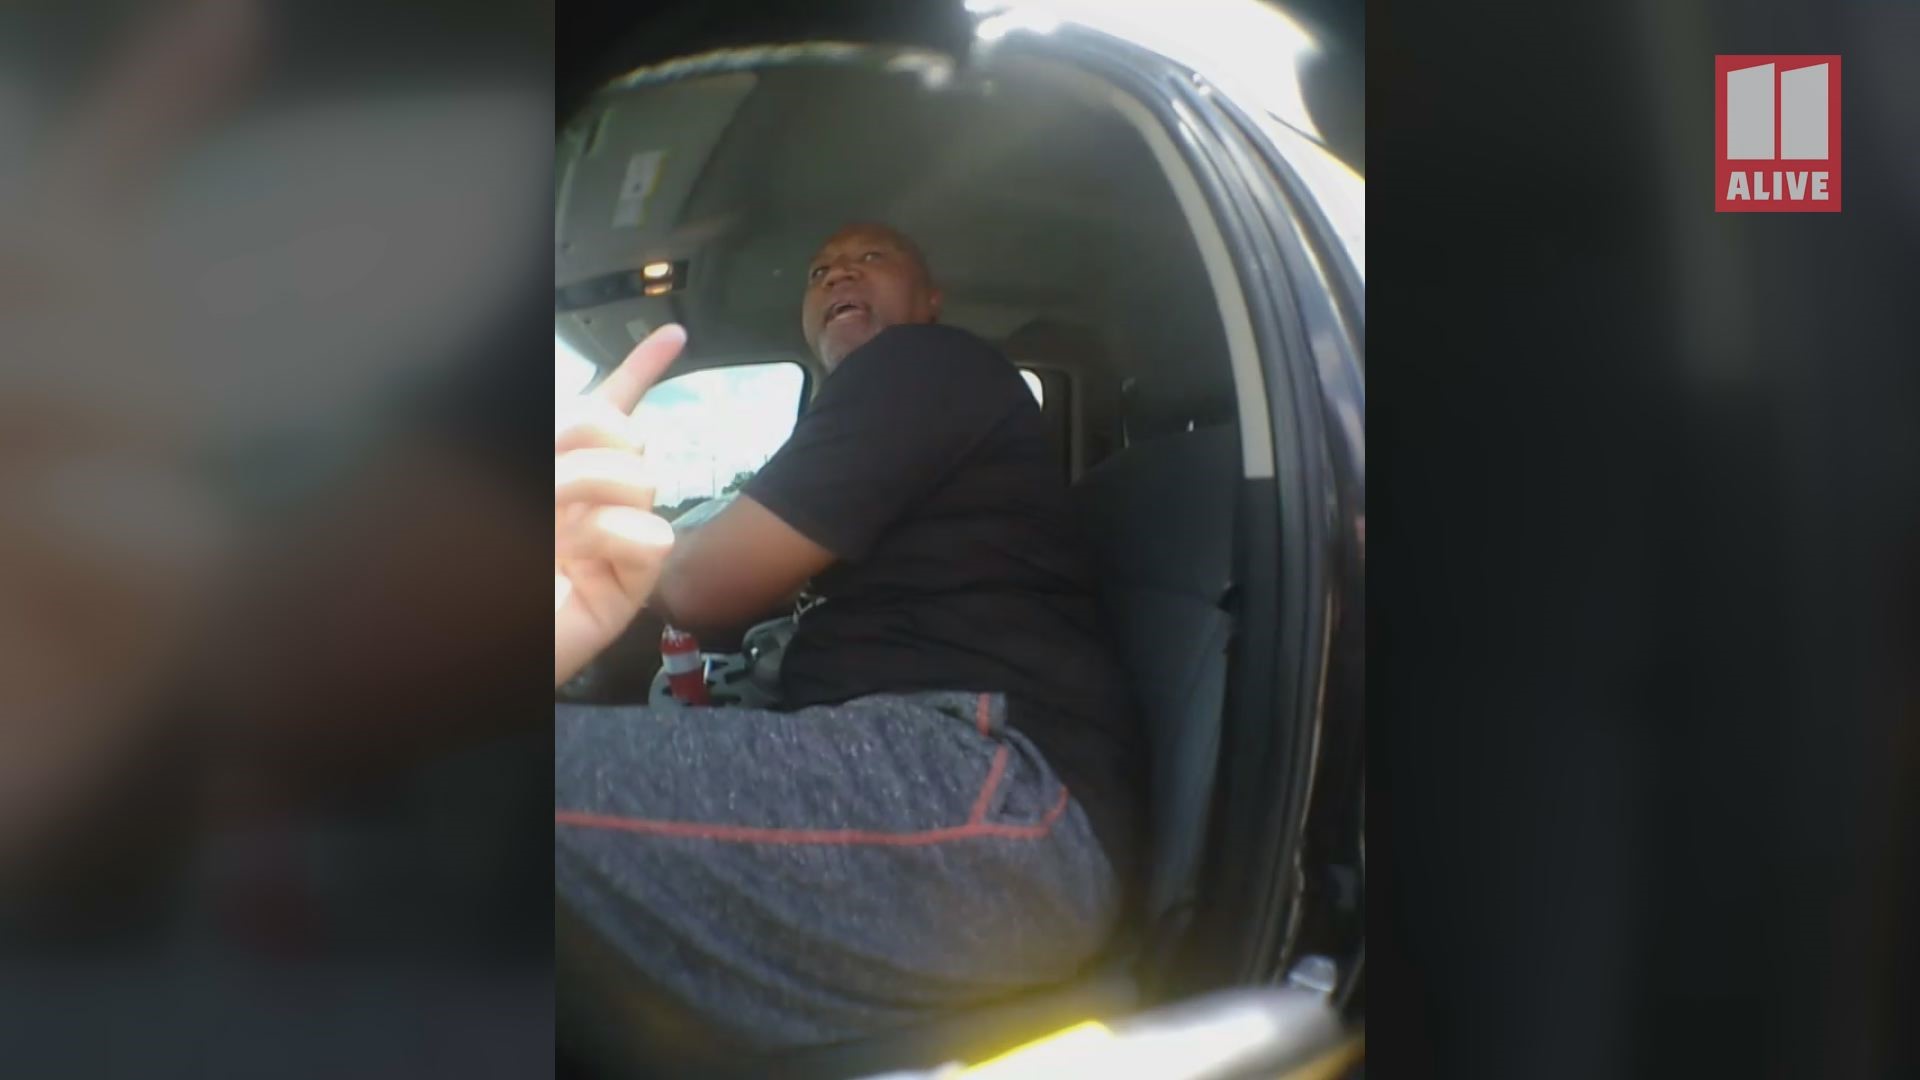 Marietta police responded to the accident, but body camera video shows the councilman being uncooperative with officers.